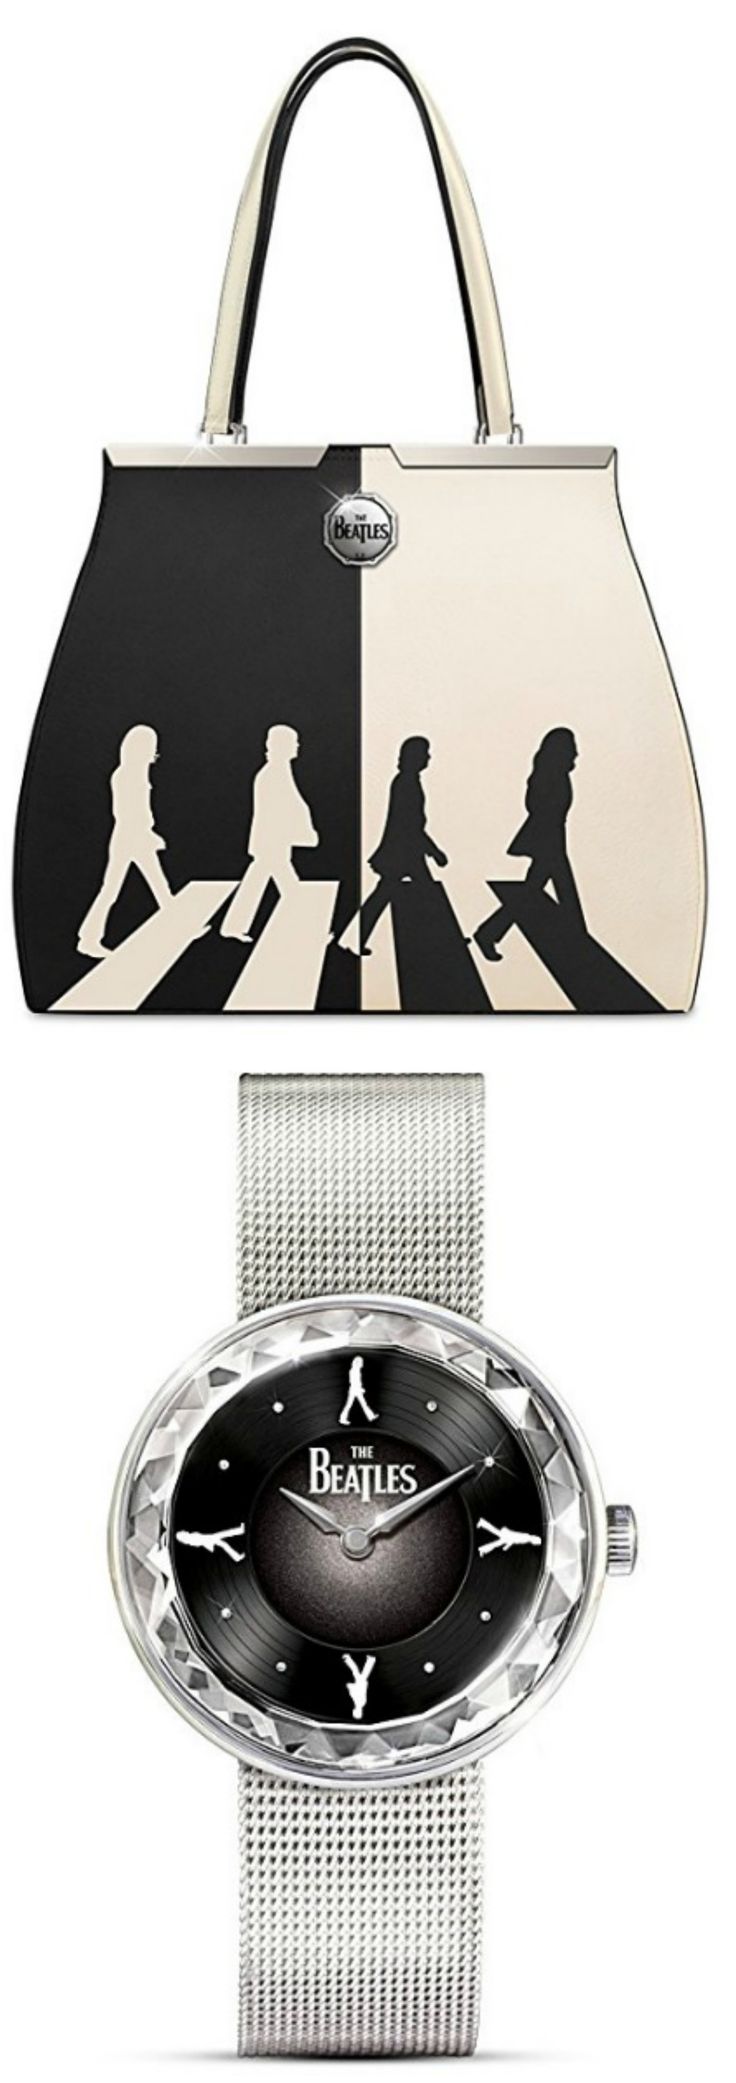 The Beatles Abbey Road women's gift ideas from The Bradford Exchange. The watch ...